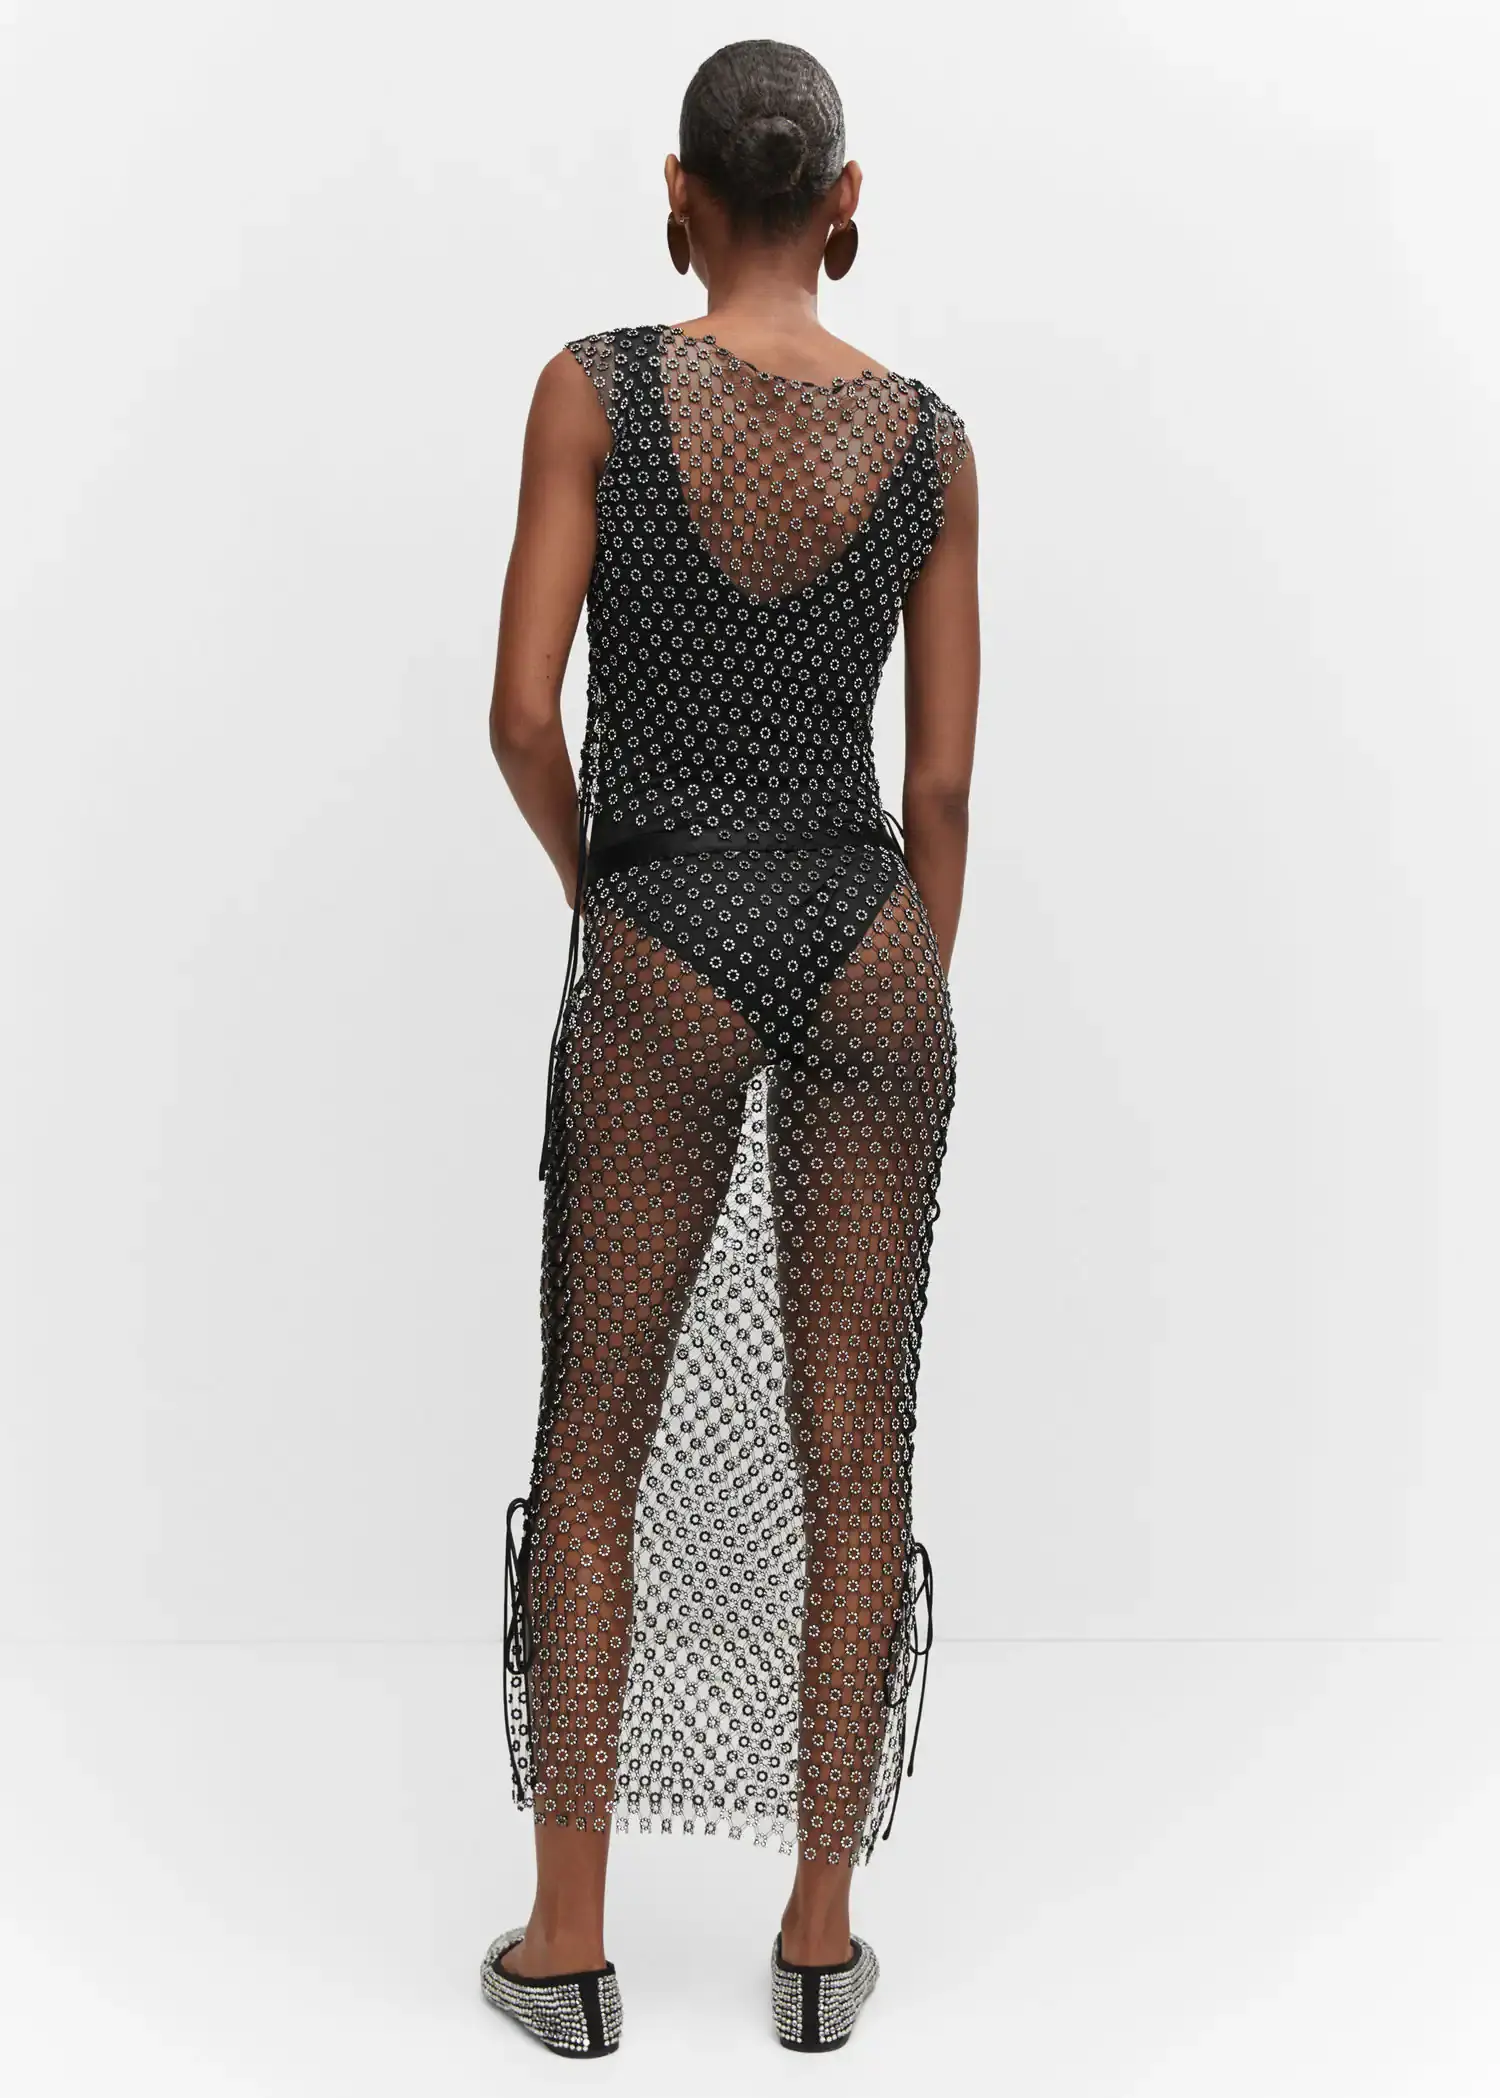 Mango Top crystals. a woman wearing a black dress with white polka dots. 